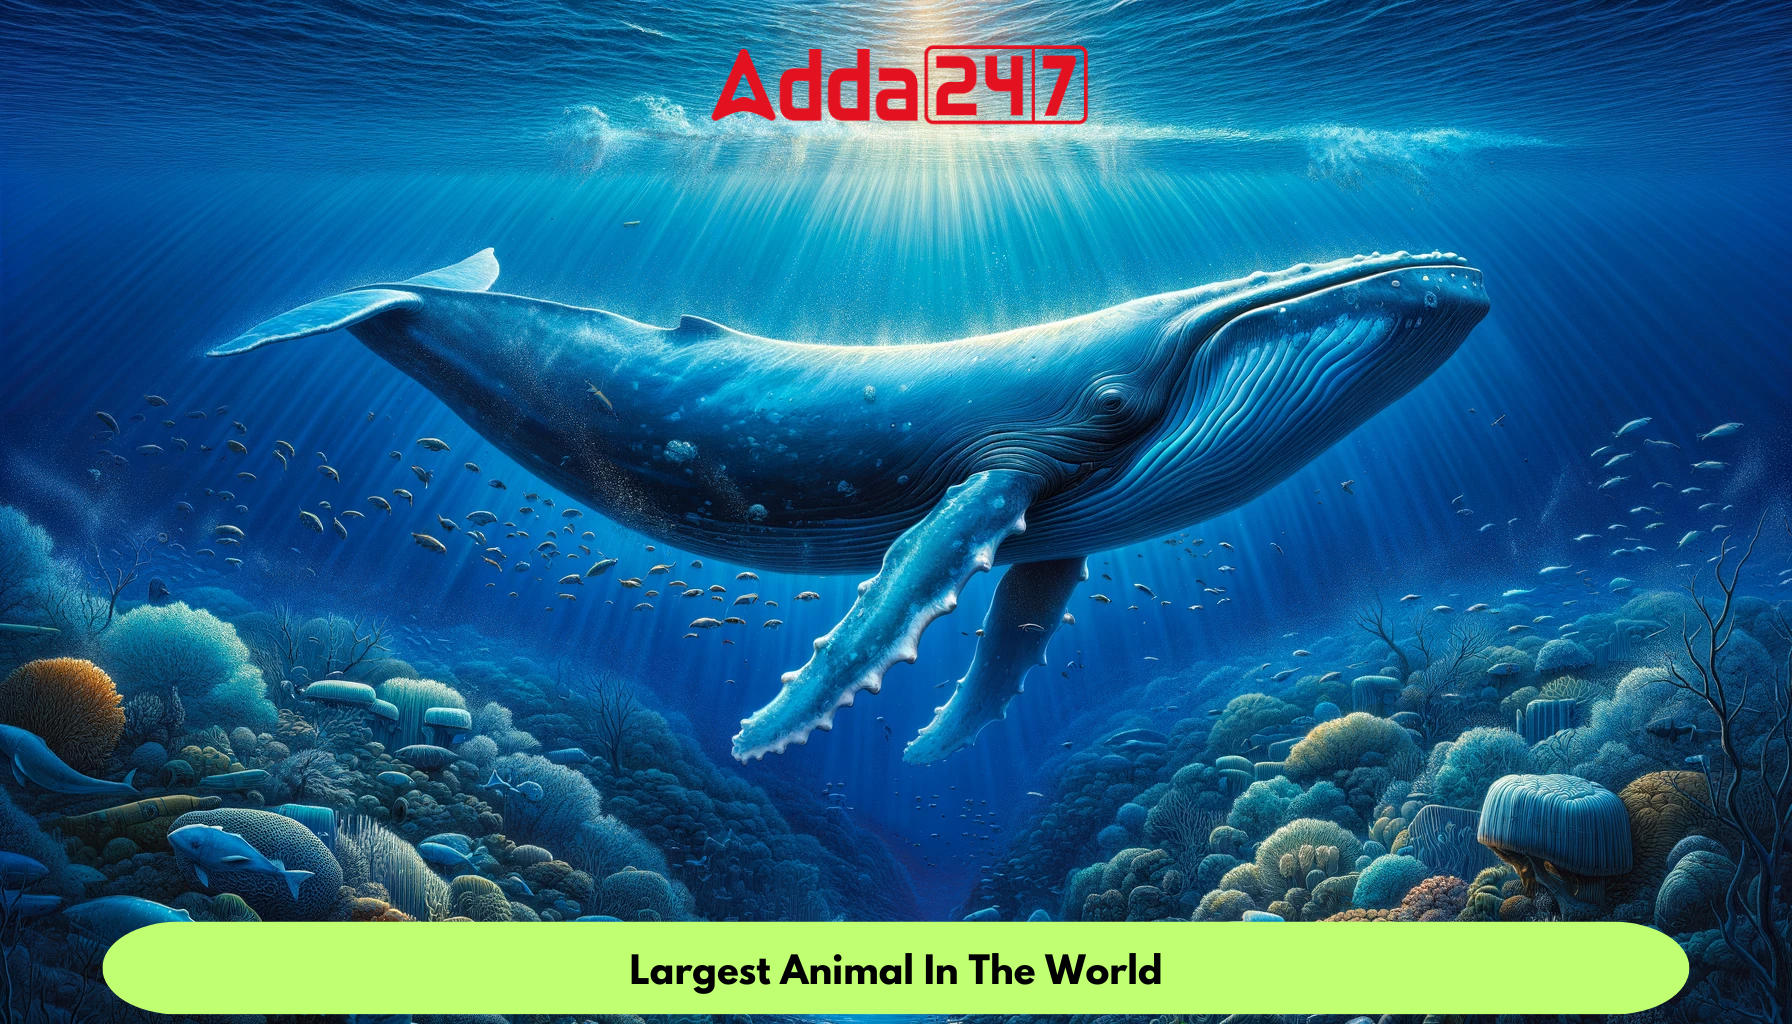 Largest Animal In The World